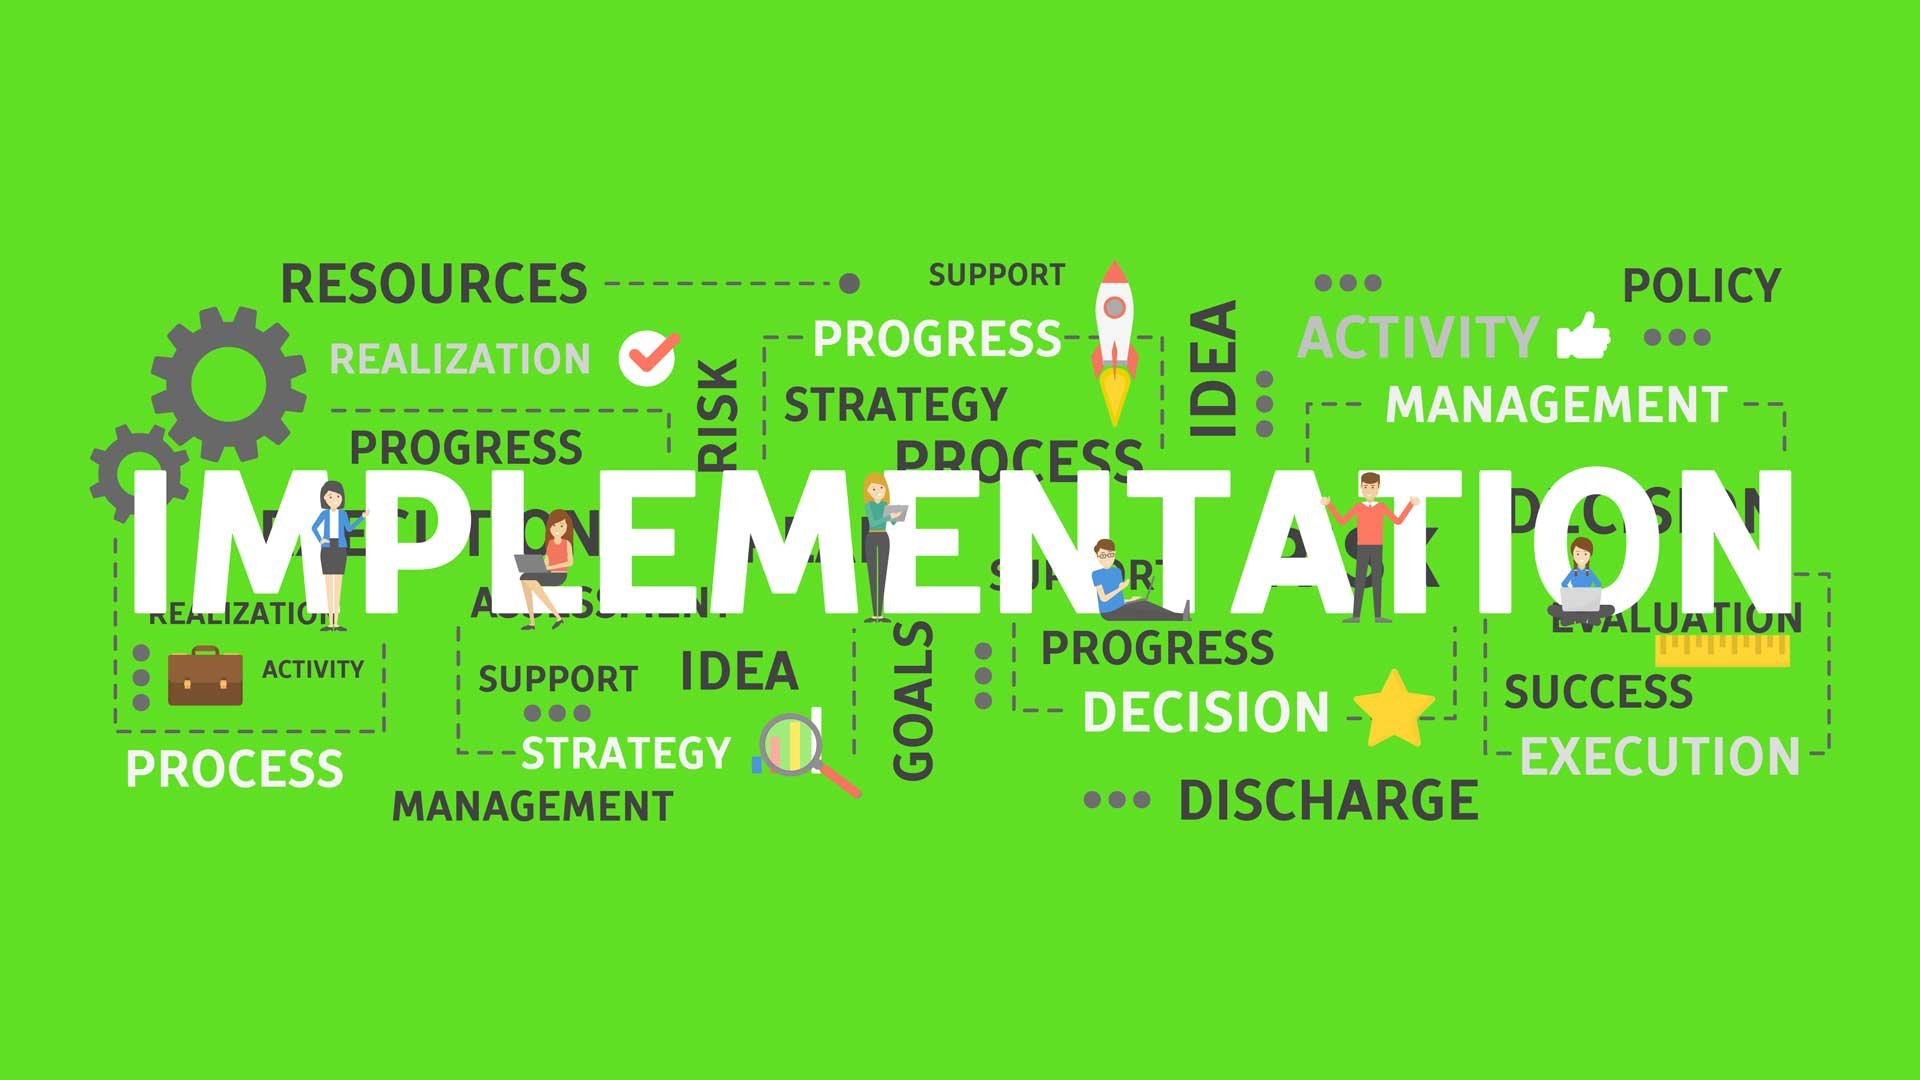 Strategic Creation and Implementation